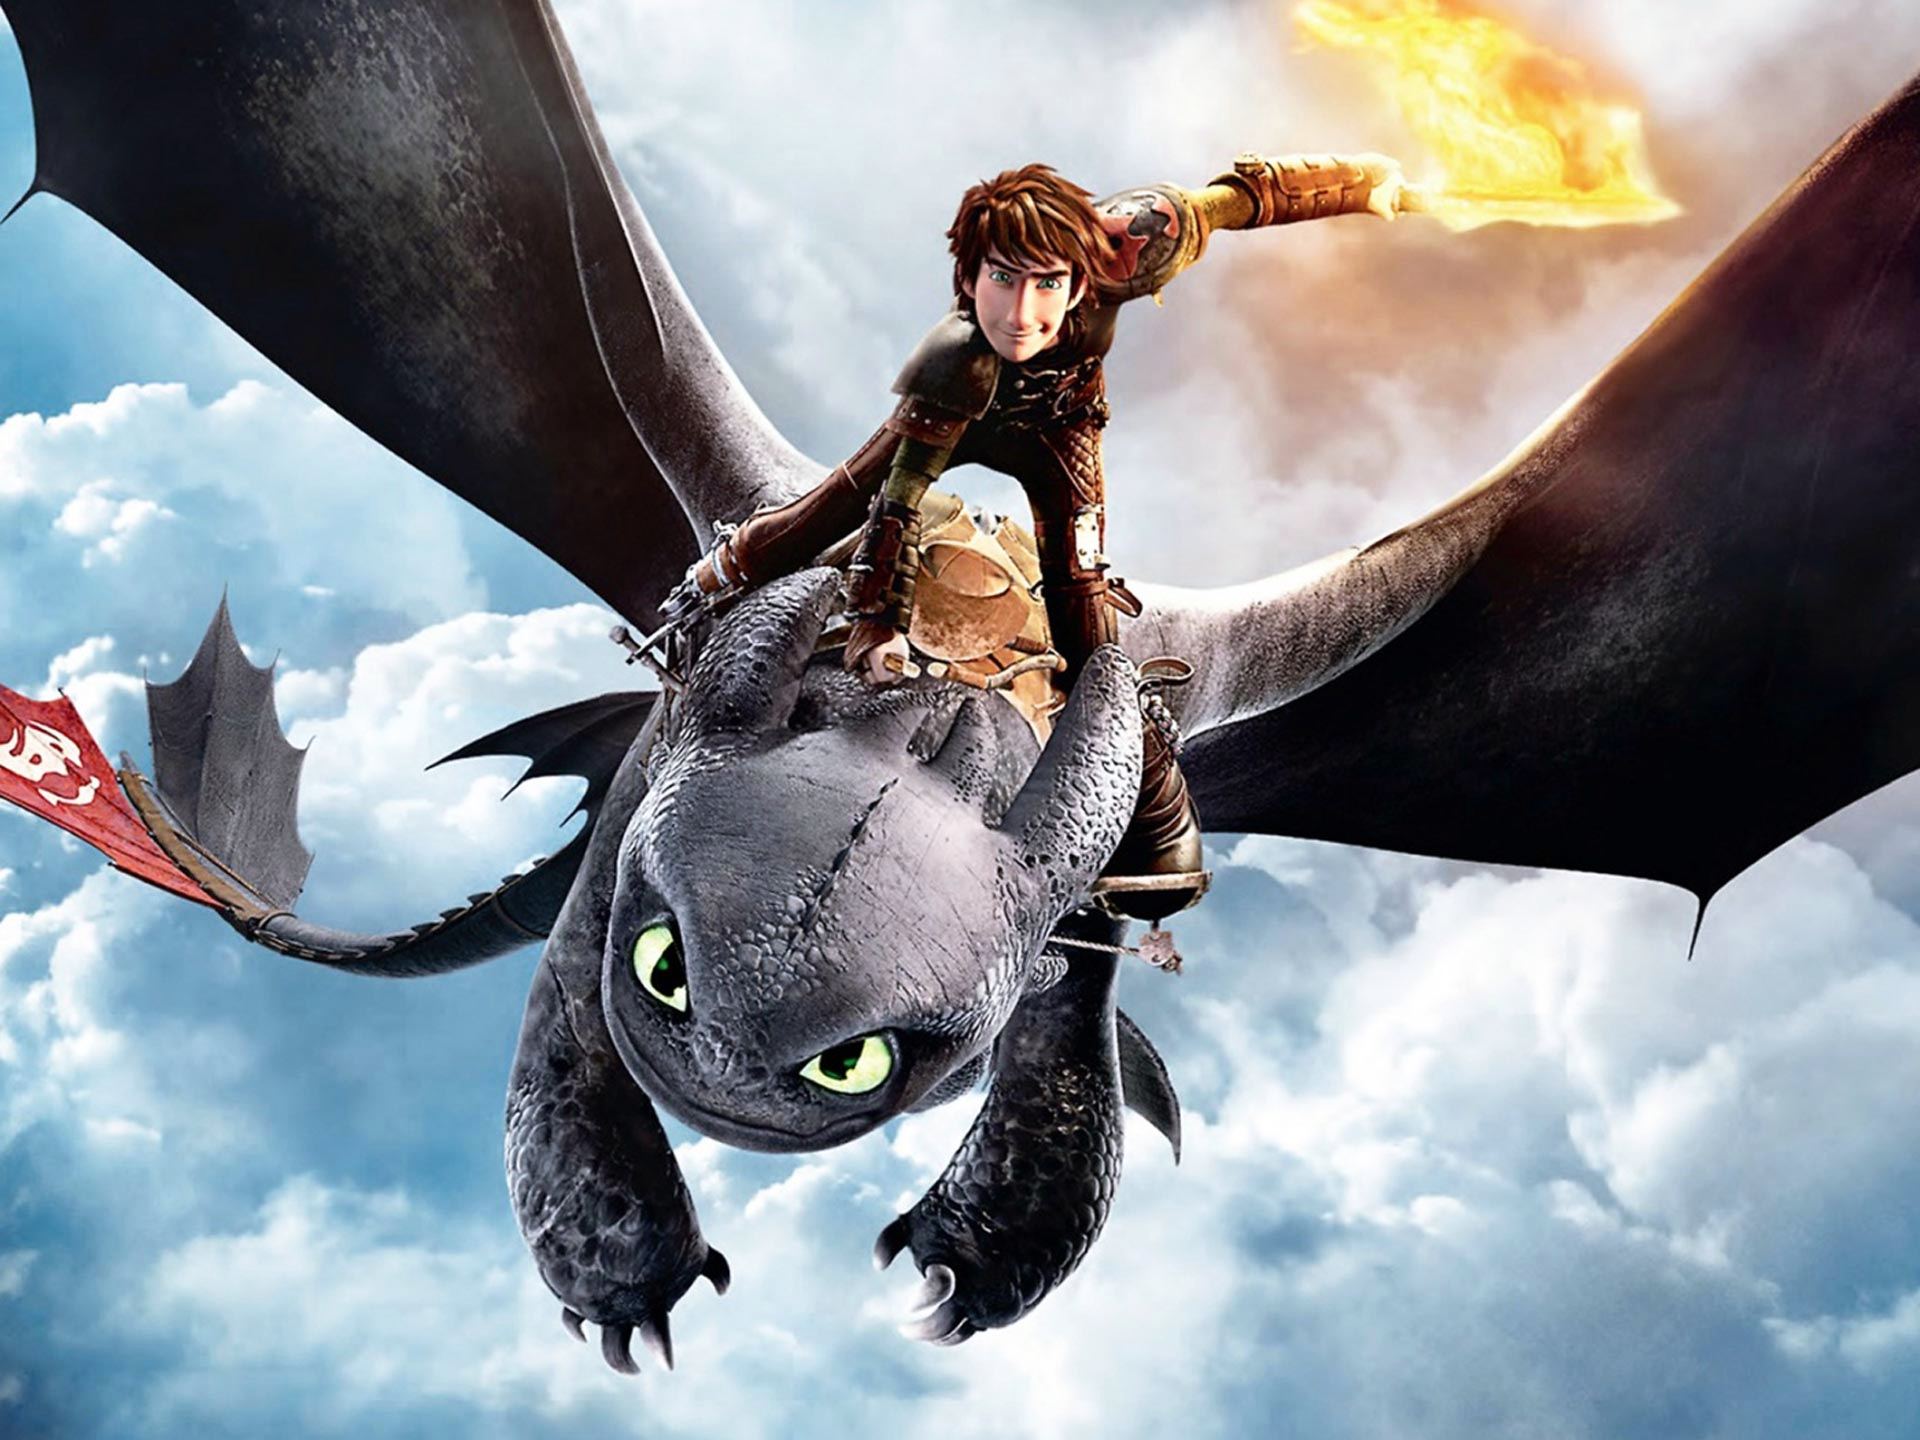 John Powell J Nsi Win Annie Award For How To Train Your Dragon